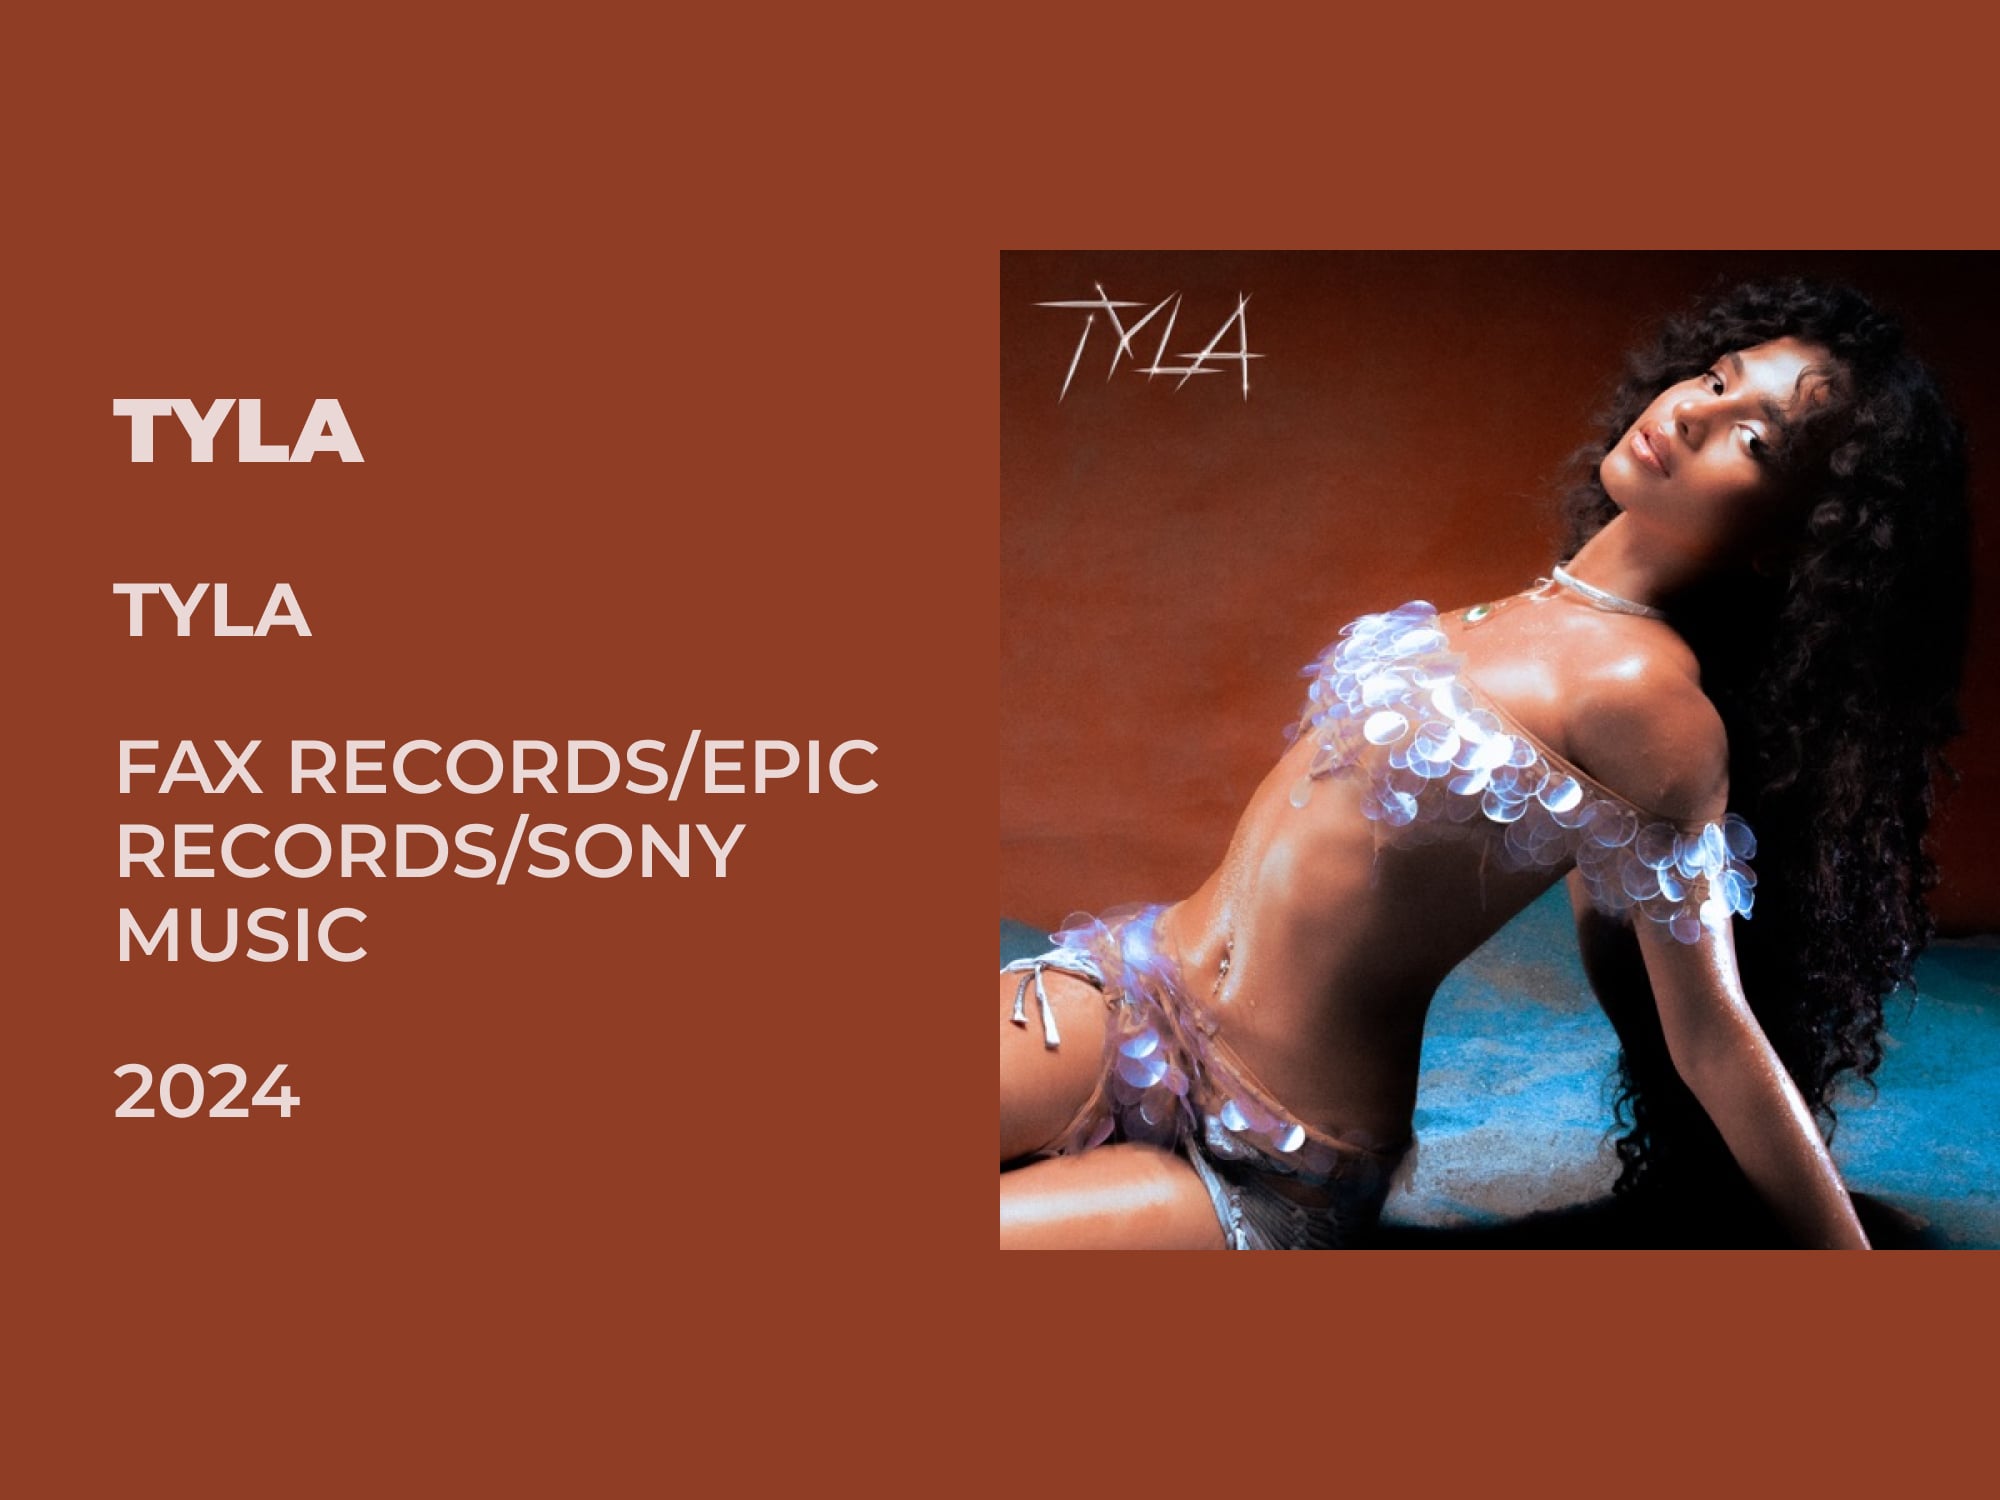 Review: ‘TYLA’ by Tyla